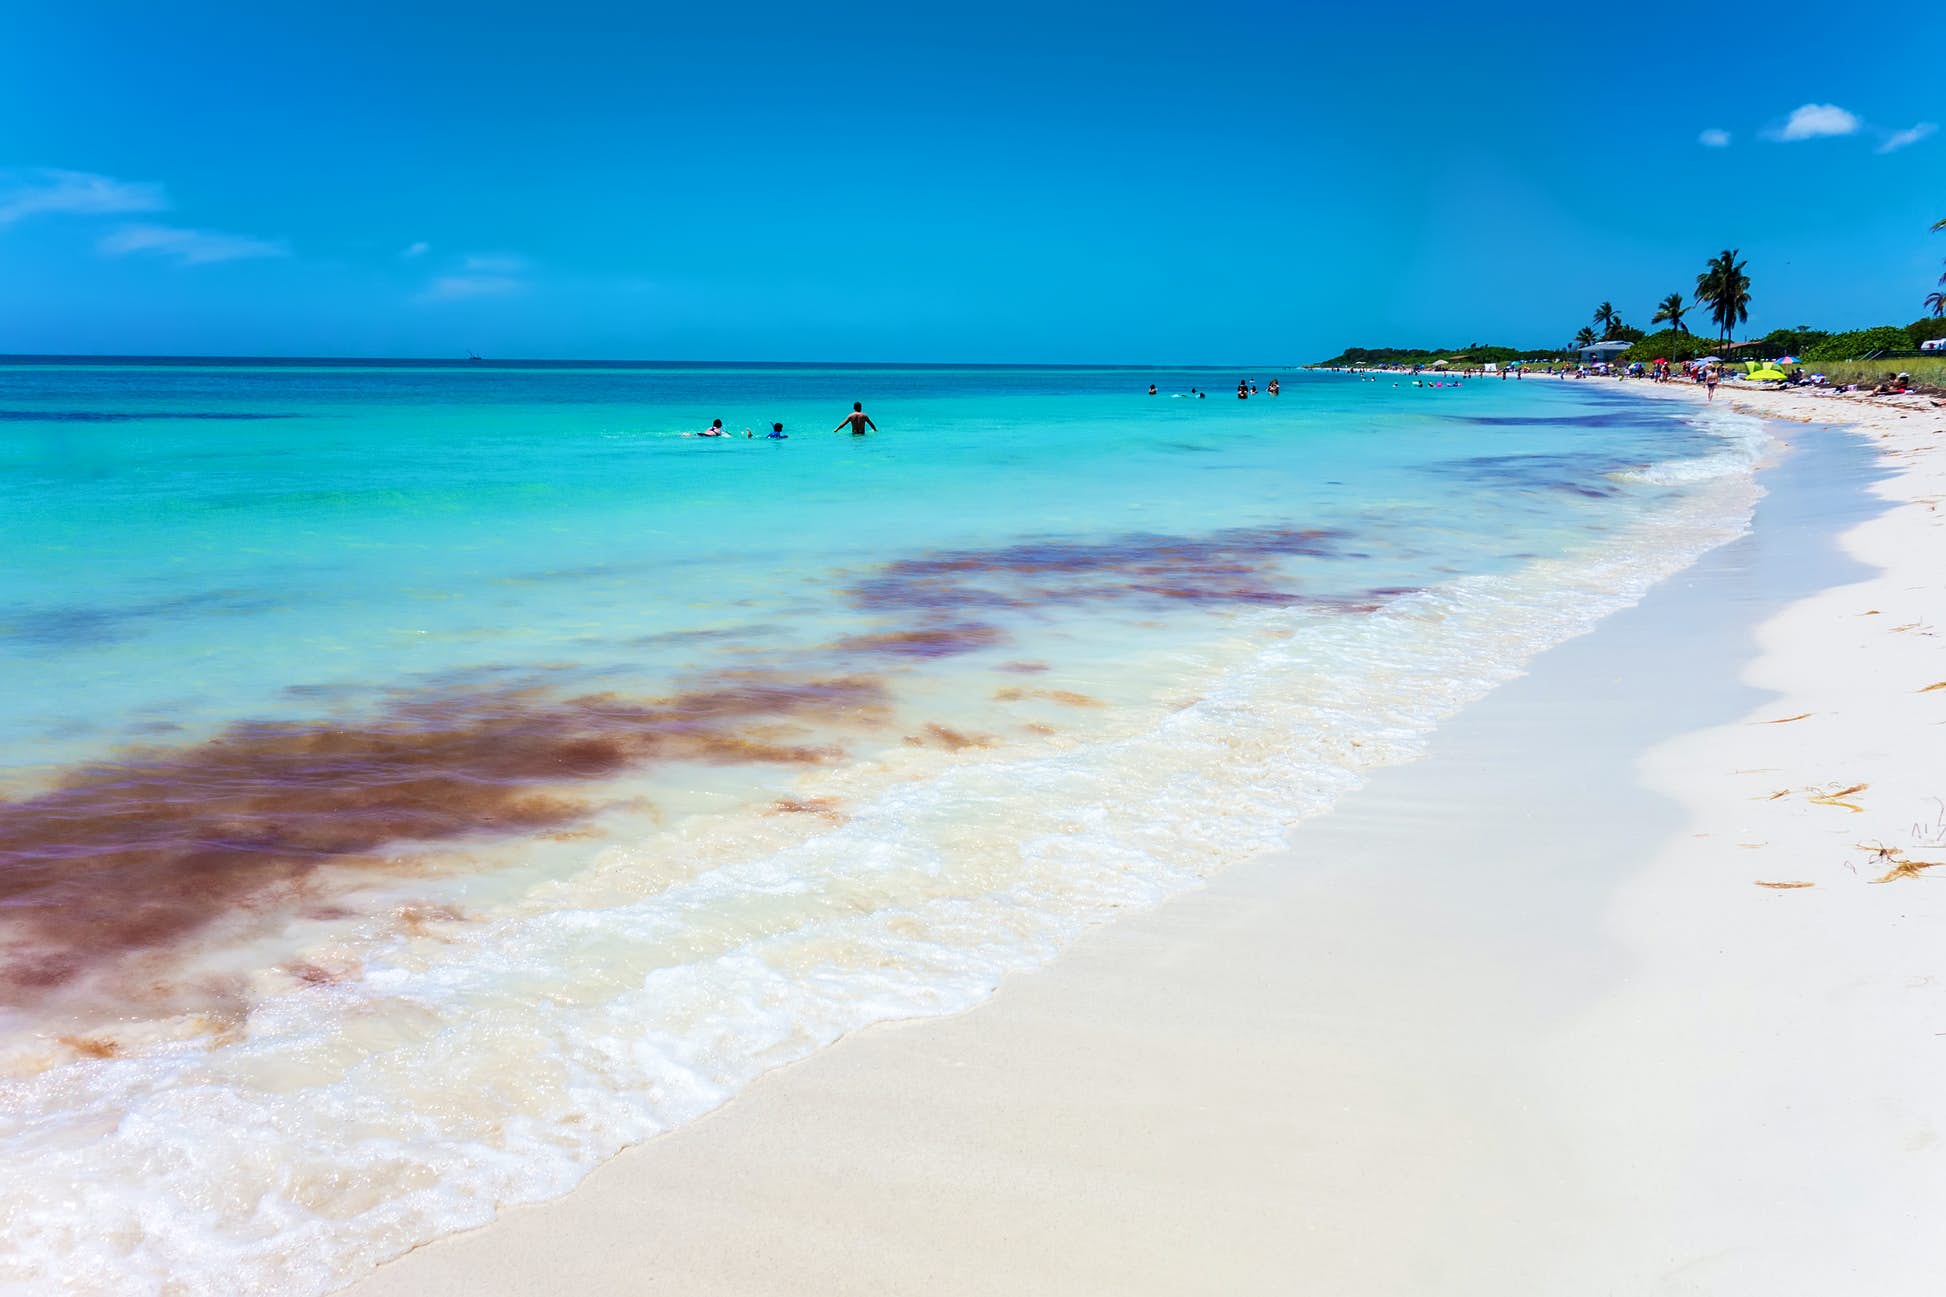 The beaches at Bahia Honda State Park are great for shallow-water swimming © Olga Yudina / Shutterstock